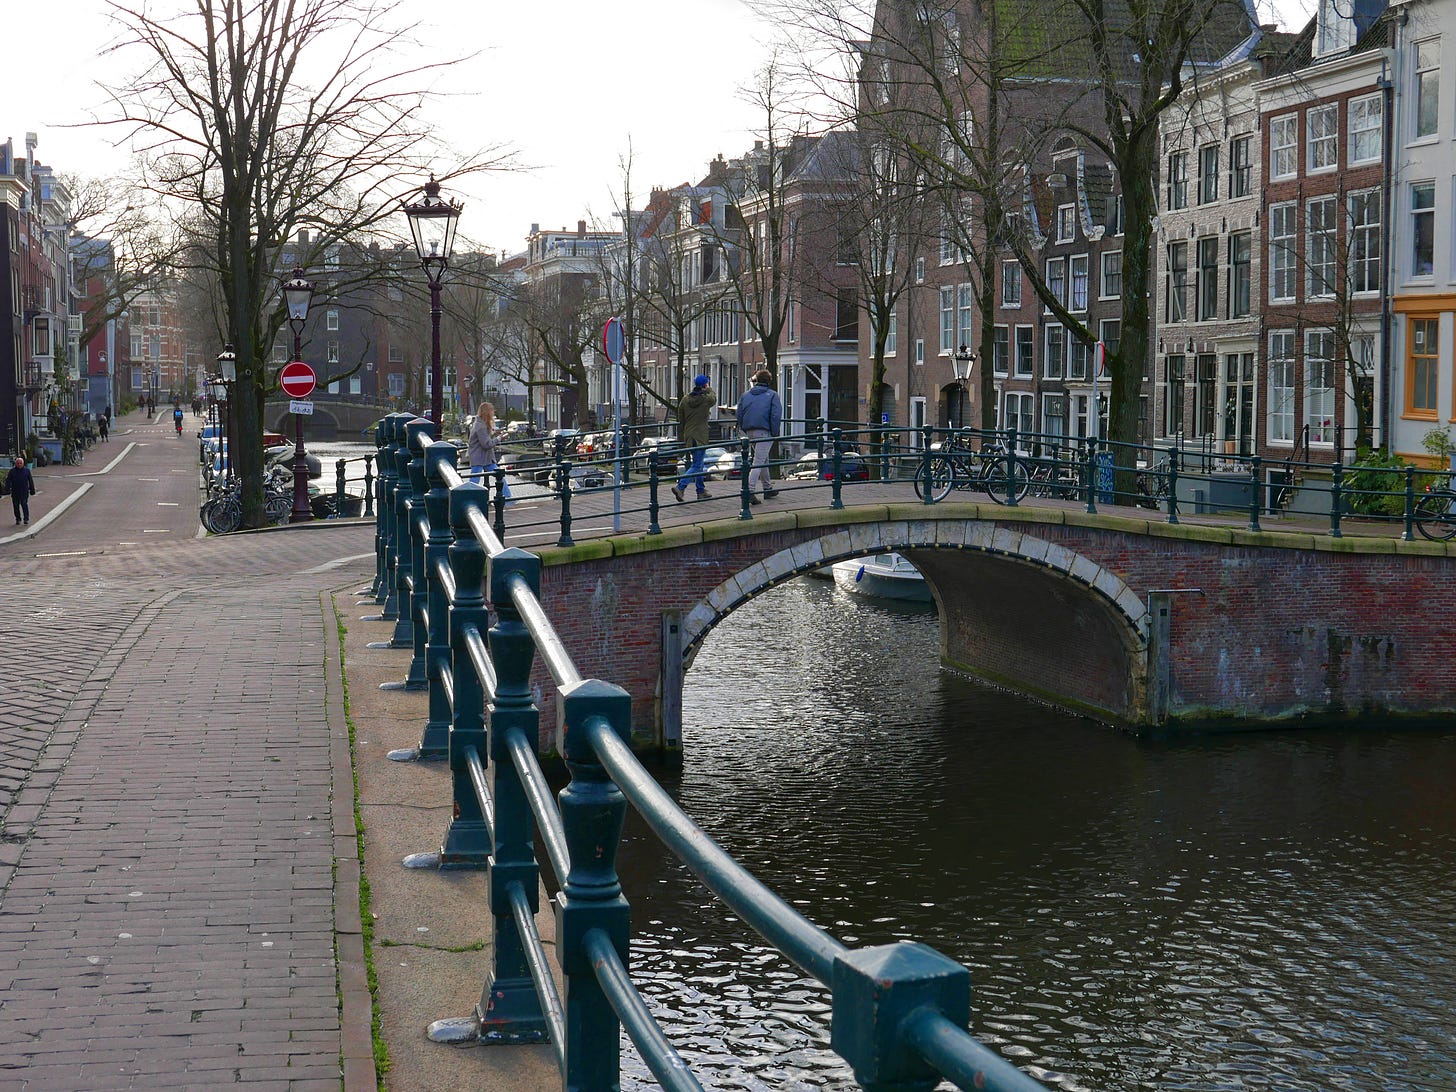 "Canal view in Amsterdam downtown with old brick bridge over the water of Reguliersgracht; free photo by Fons Heijnsbroek, january 2022" by Fons Heijnsbroek is licensed under CC BY-SA 4.0.